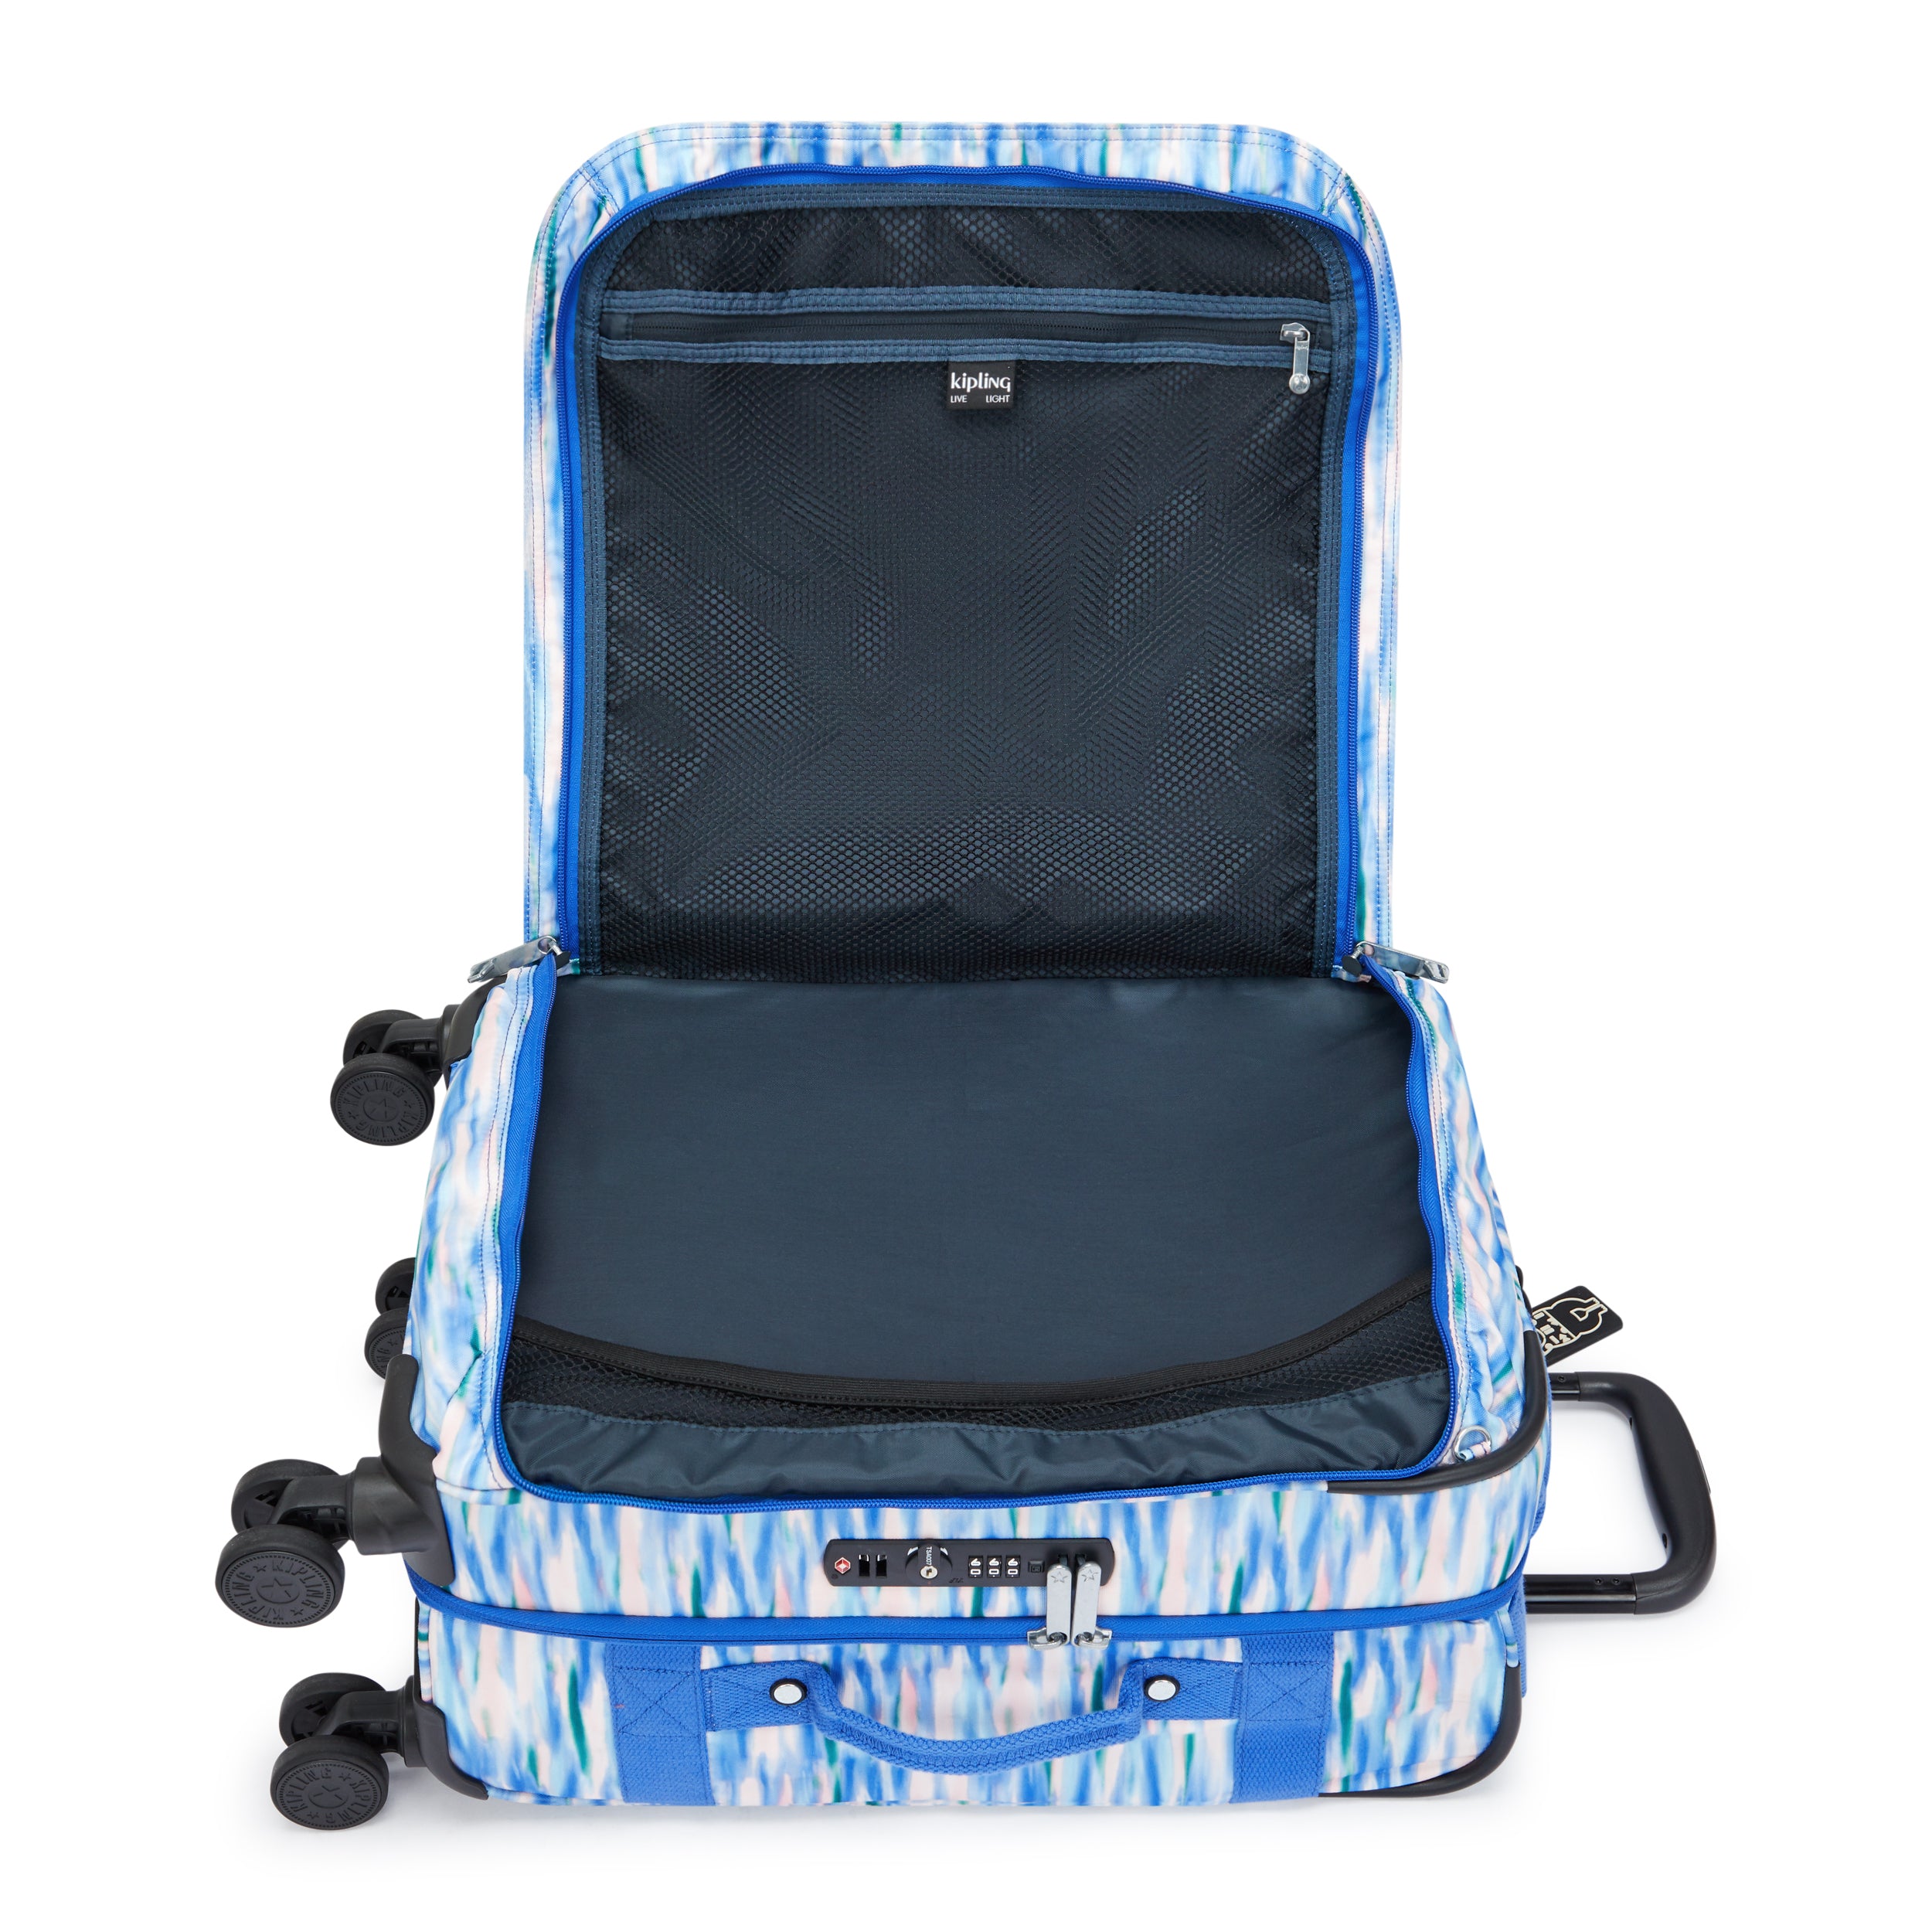 KIPLING-Spontaneous S-Small cabin size wheeled luggage-Diluted Blue-I7211-TX9